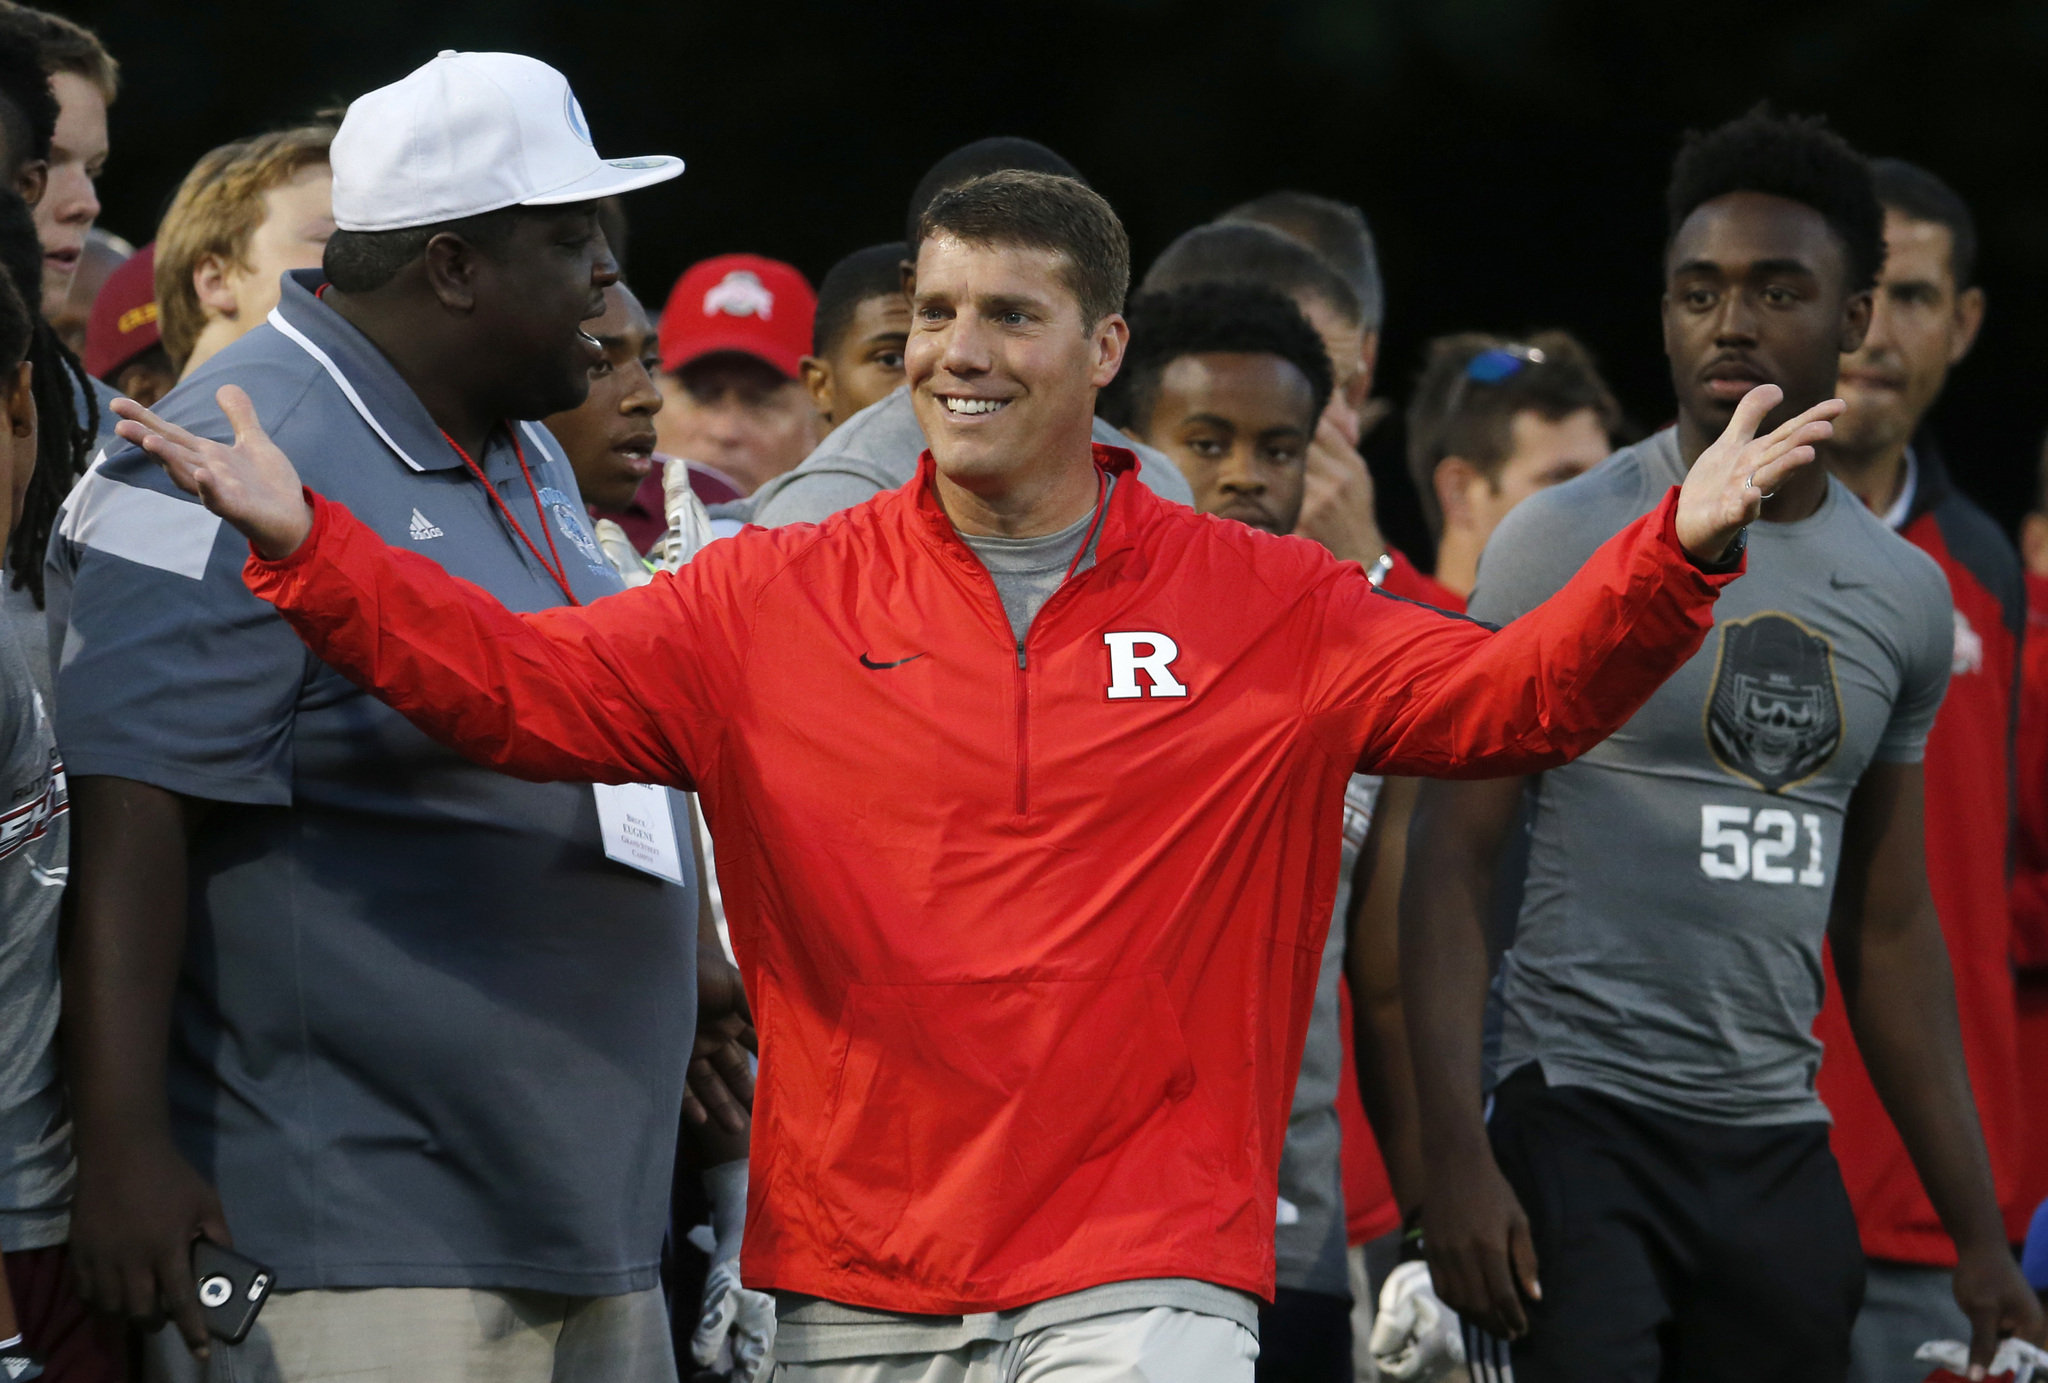 rutgers-holds-satelite-football-camp-with-osu-6d1fc677d7ee8168.jpg